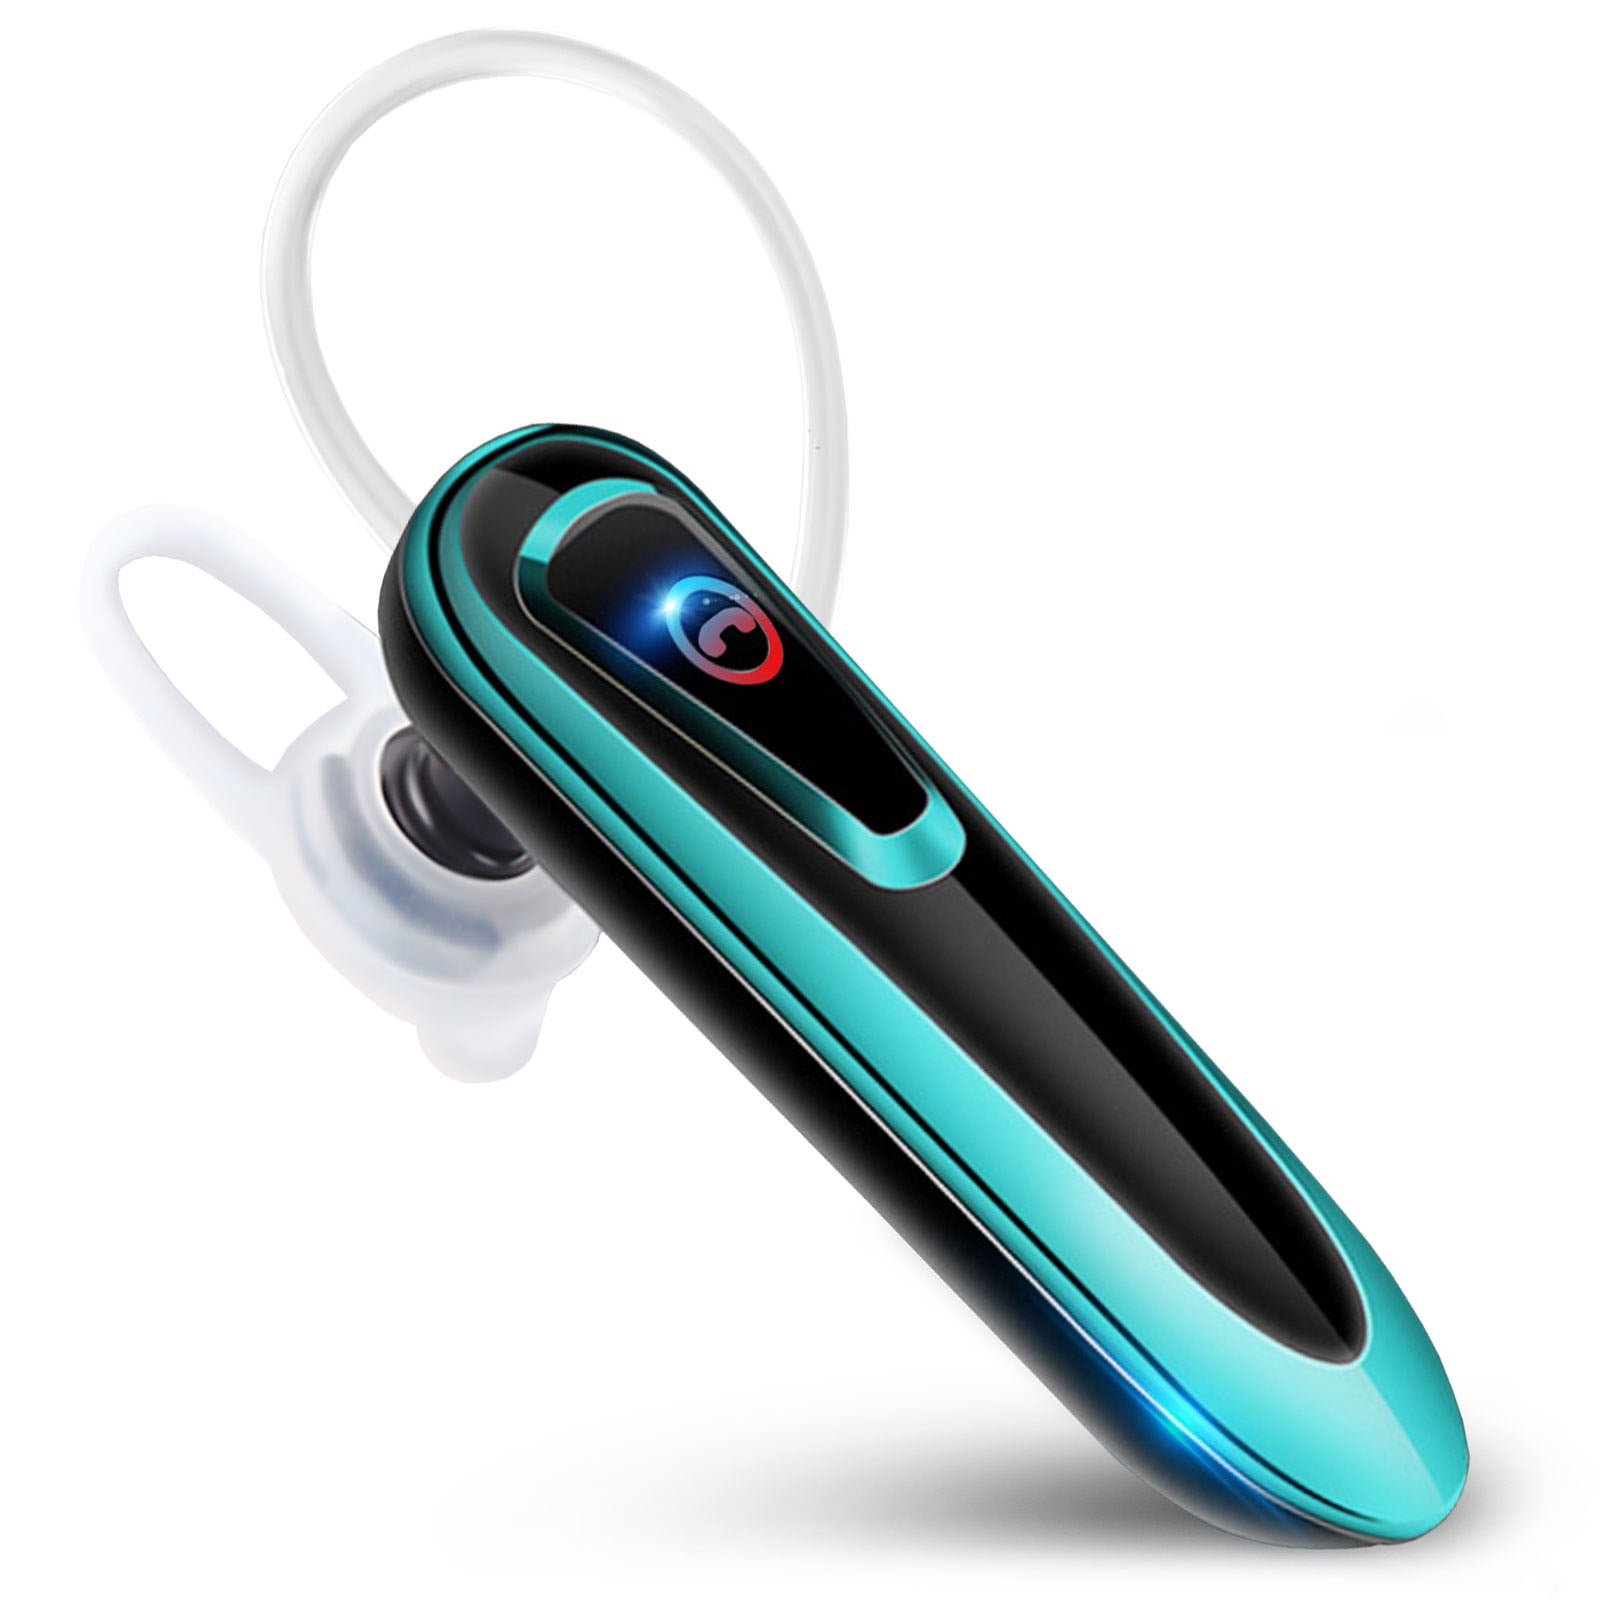 EEEkit Bluetooth Headset 24Hrs Playtime Wireless Bluetooth V4.1/5.0 Earpiece CVC 6.0 Noise Canceling Headphone Car Trucker Business Earbud with Mic Compatible with iPhone Samsung Android